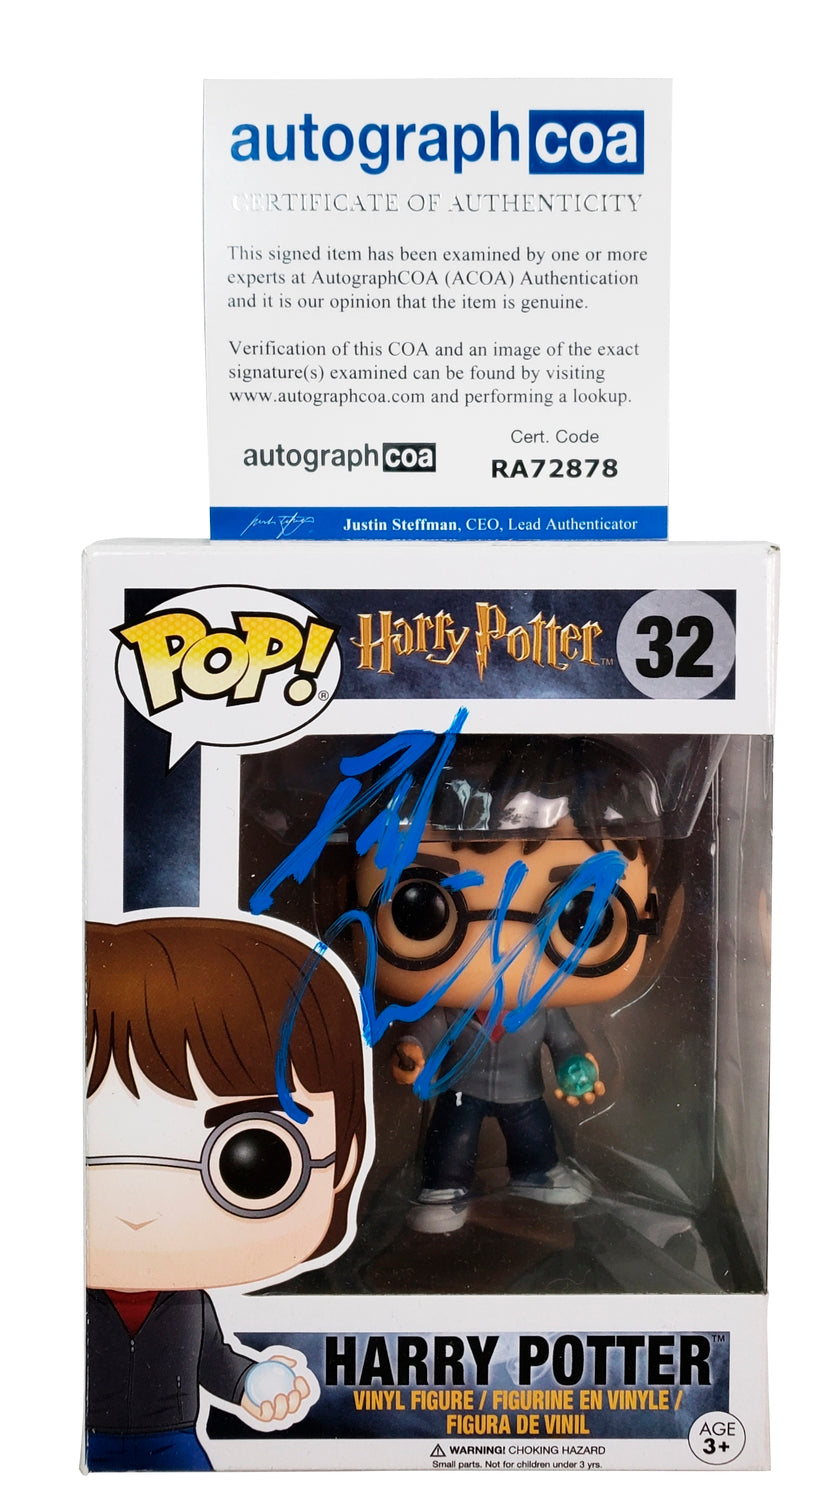 Harry Potter Daniel Radcliffe Autograph Signed Funko Pop #32 Crystal Ball